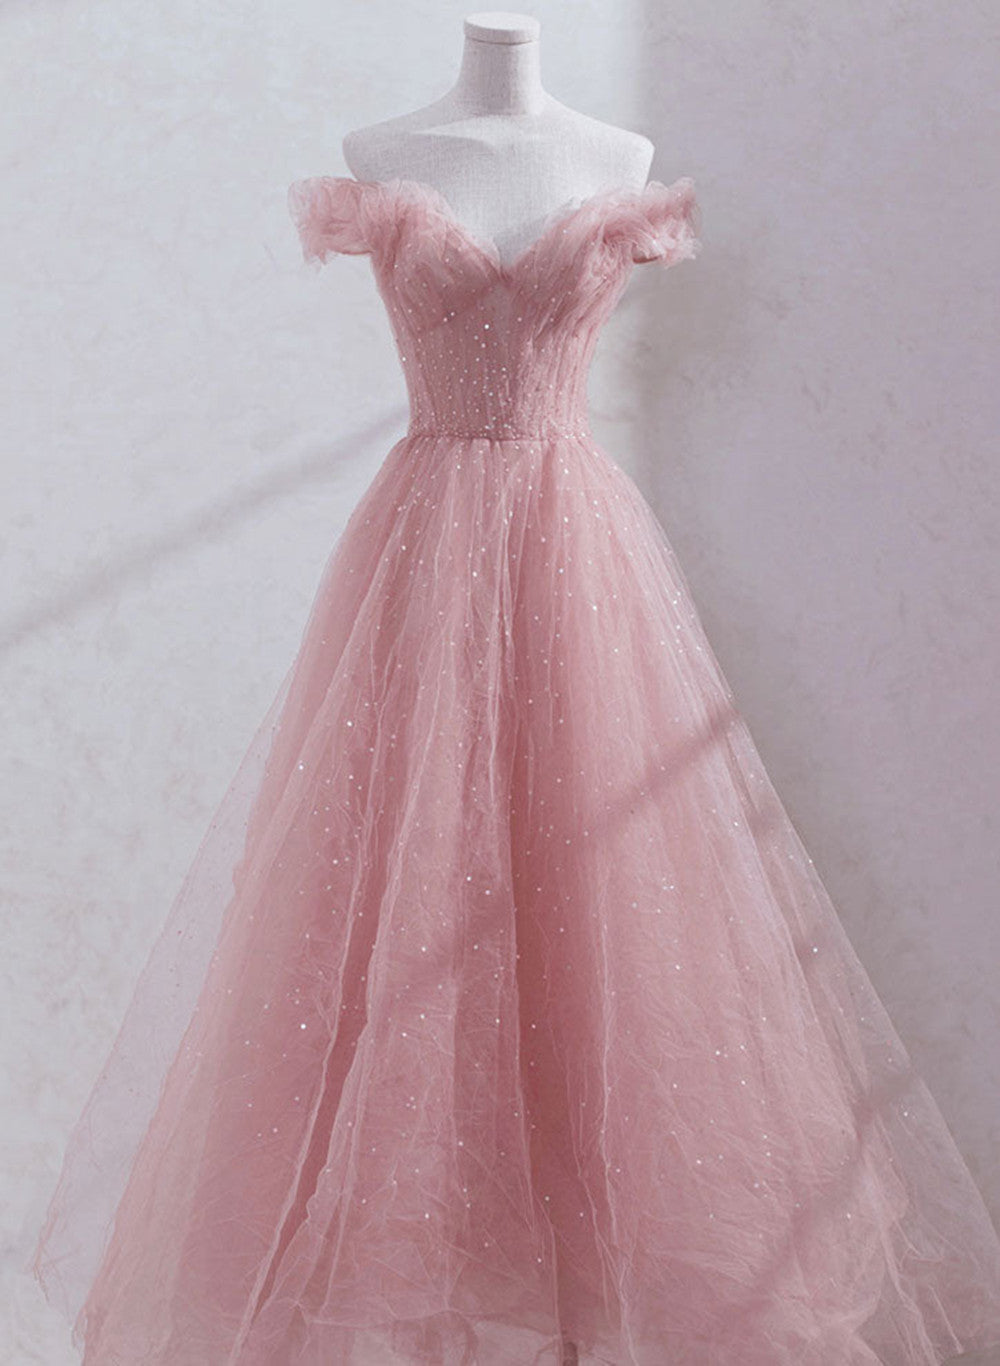 Fantasy Prom Dress, Pink Shiny Tulle Beaded Off Shoulder Long Party Dress, Pink Tulle Formal Dress